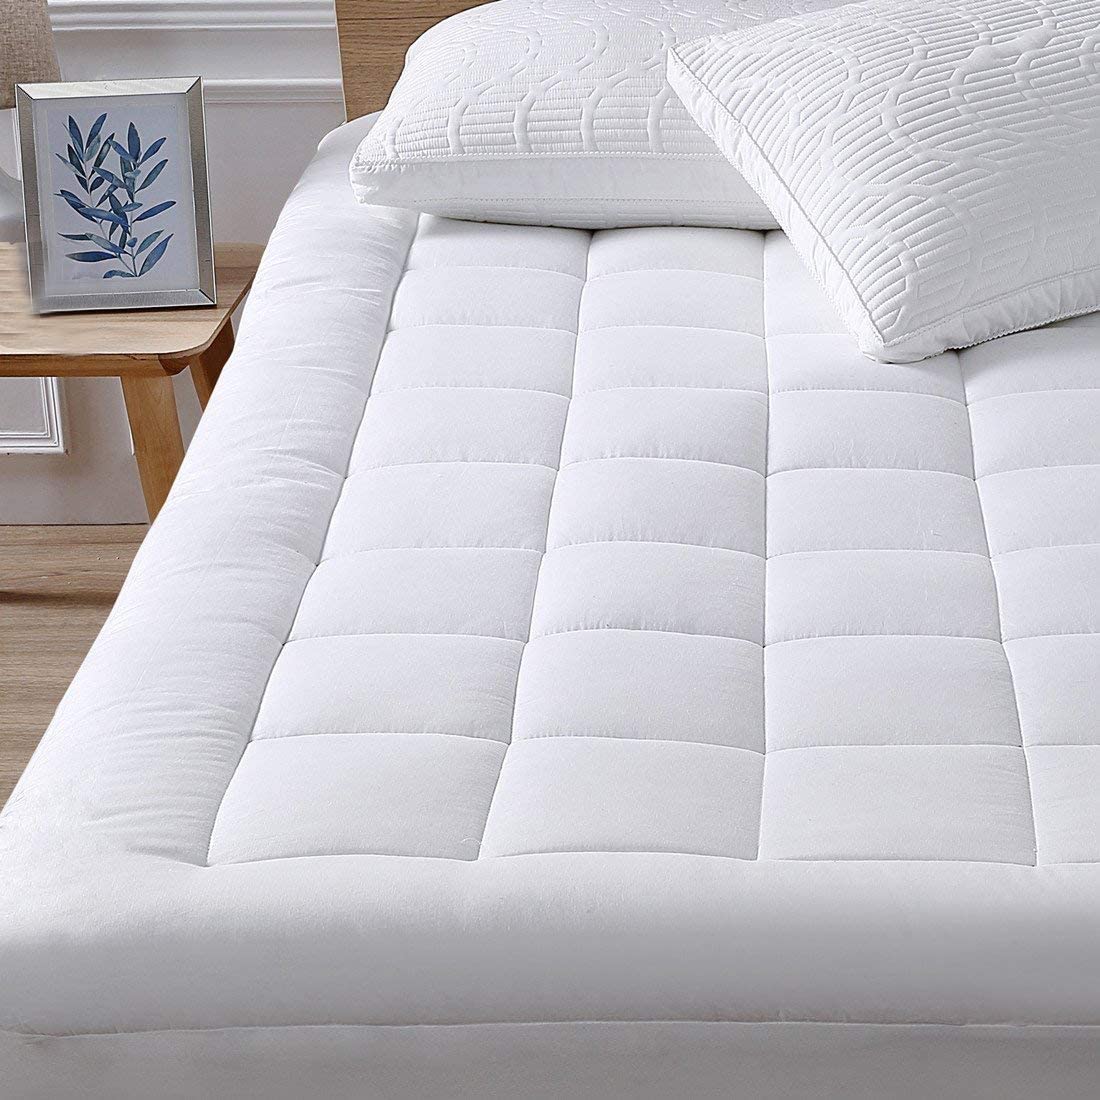 Details about   Cooling Luxury Mattress Topper Pillowtop Snow Down Alternative Deep Fitted Pad 